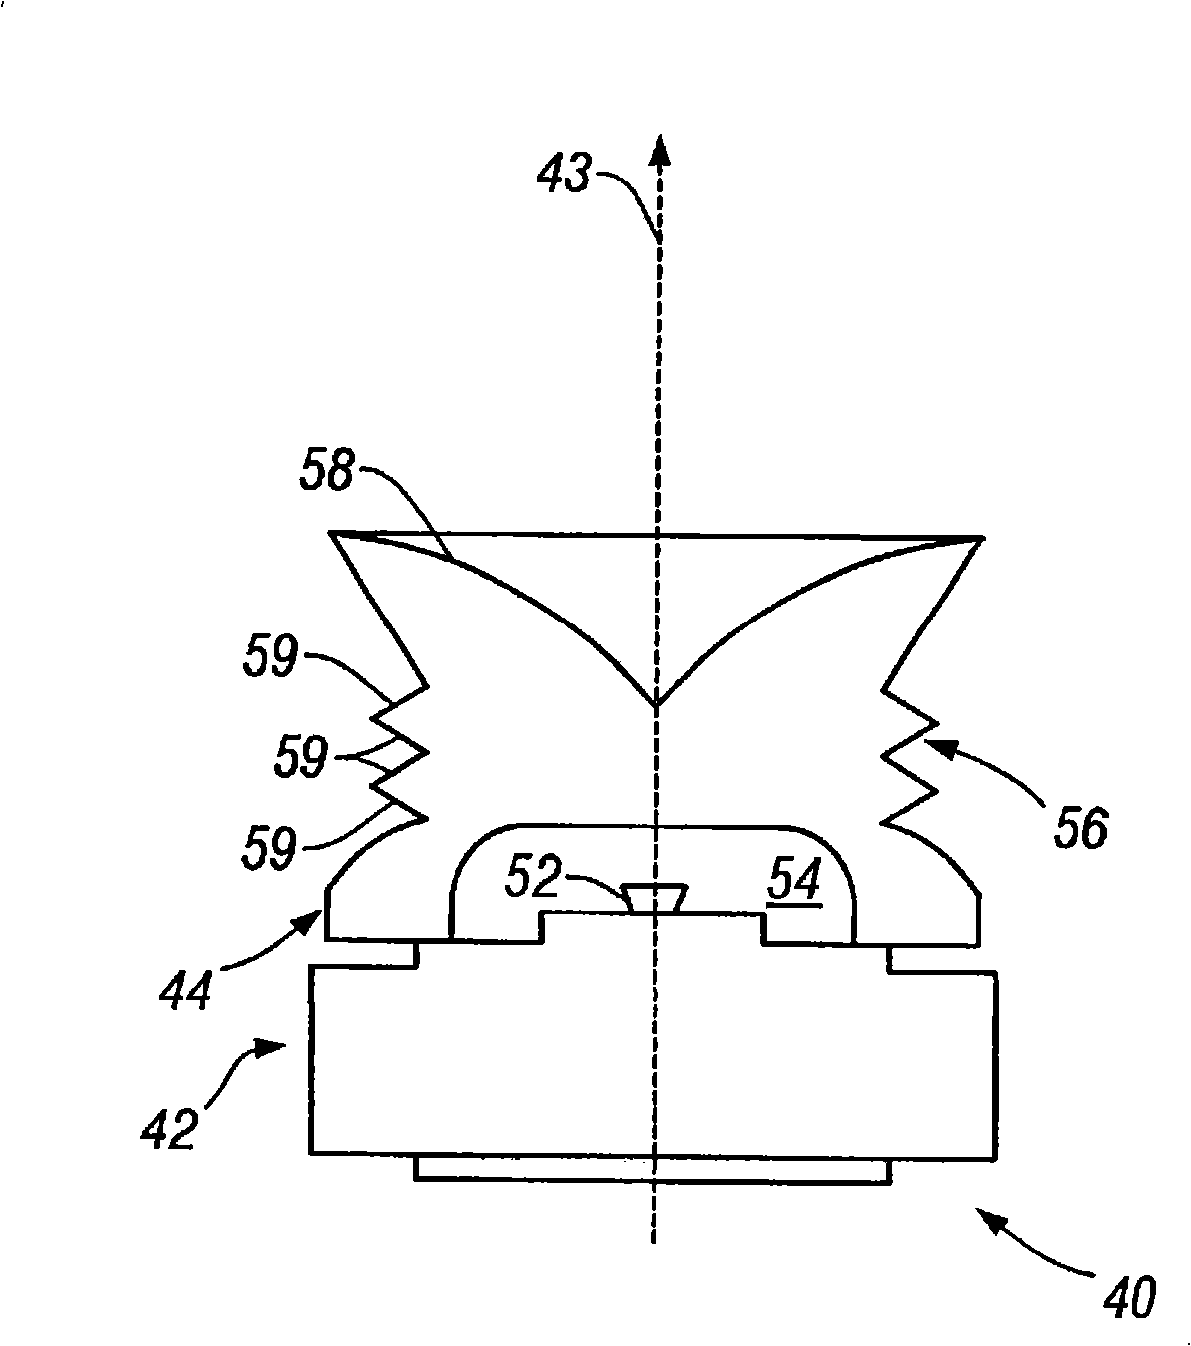 Illuminating device and its lens used therein